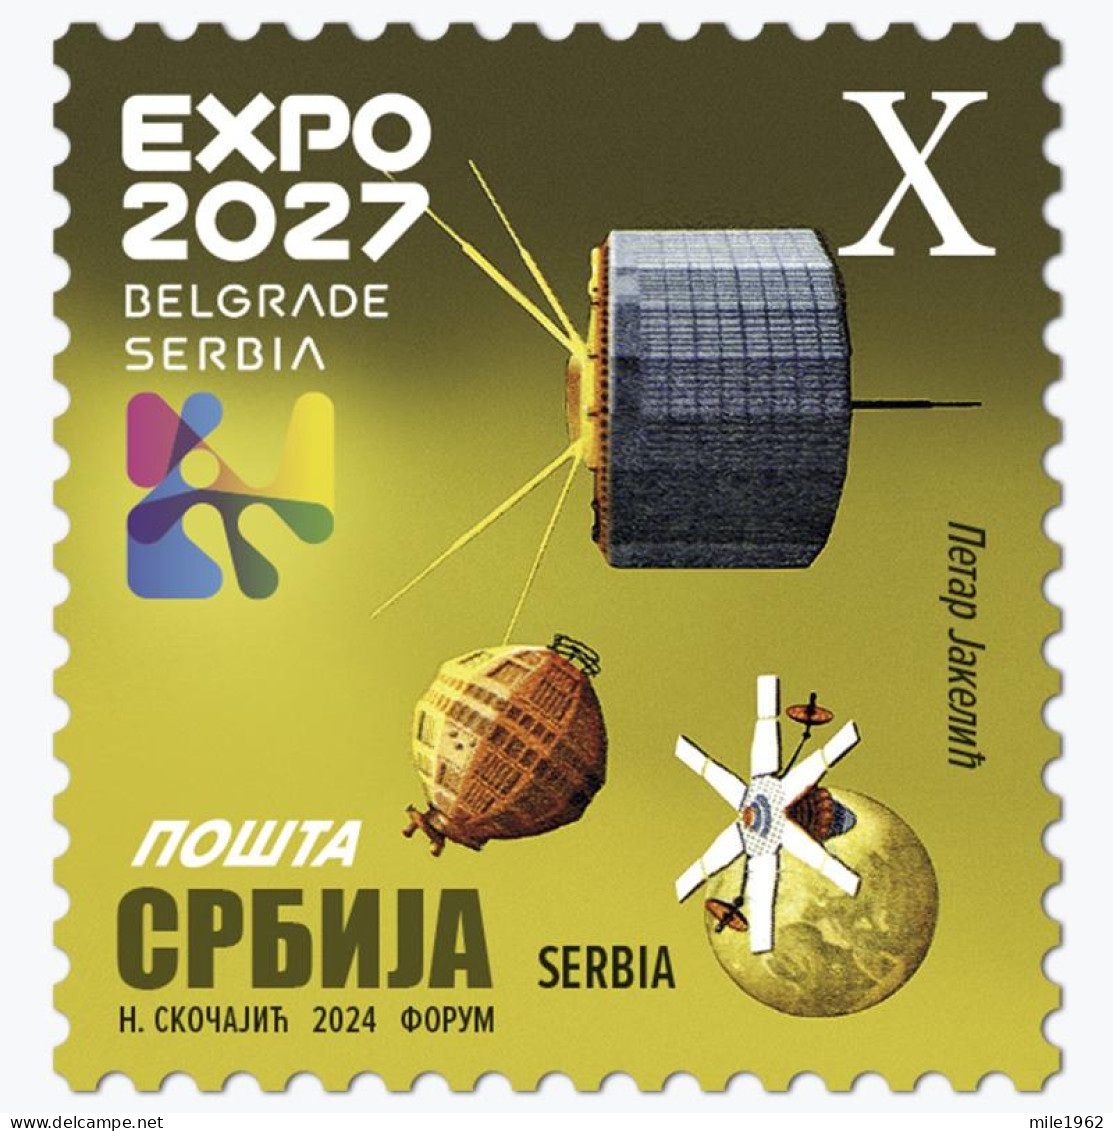 LOT 6 STAMPS - EXPO 2027, Definitive Stamp E,H,P,O B.G -  SERBIA 2024  - Serbia